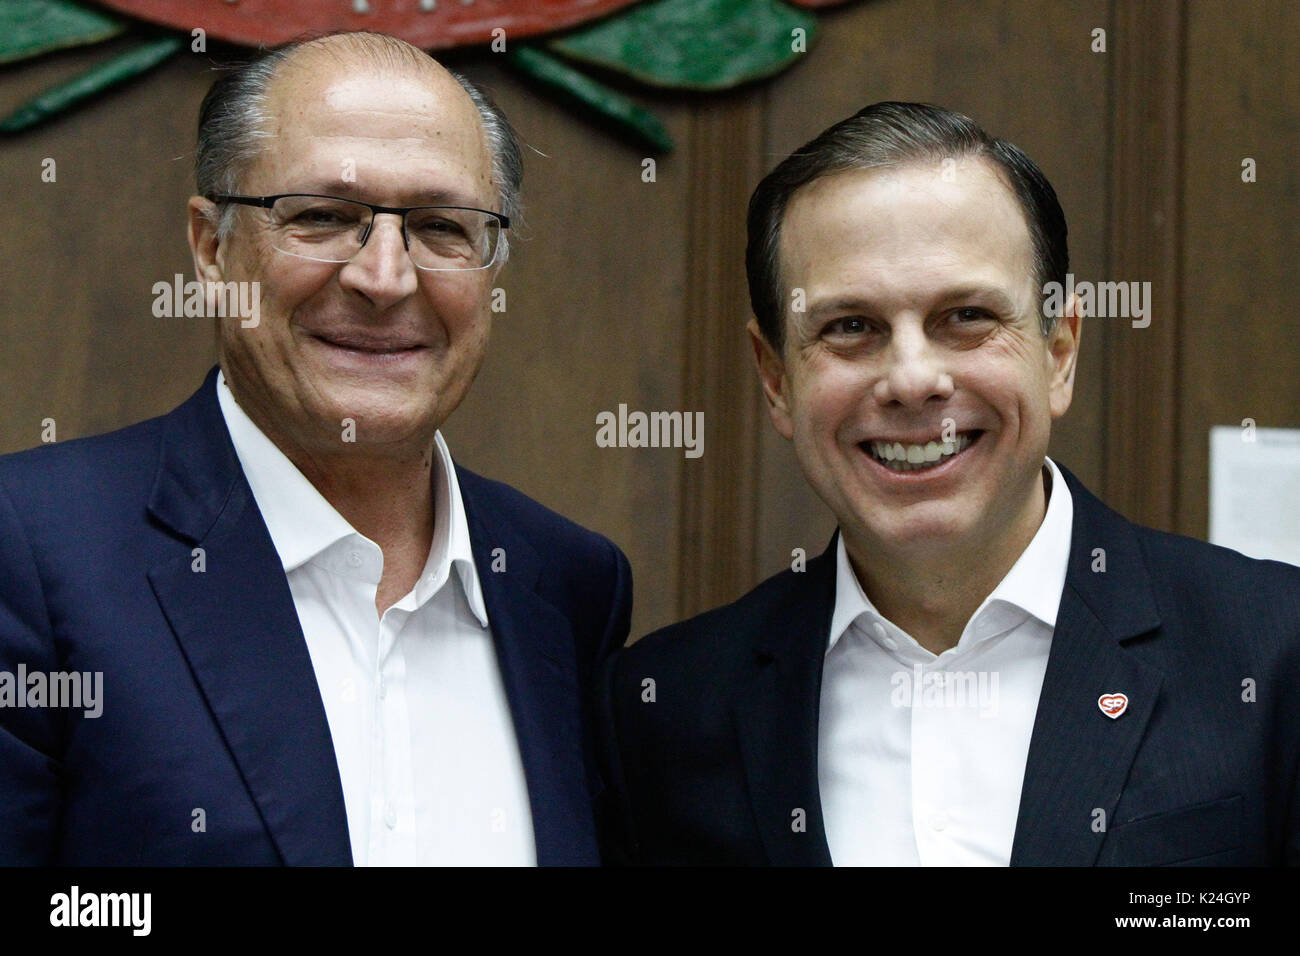 SÃO PAULO, SP - 28.08.2017: LANÇAMENTO DO PROCEDIMENTO PRELIMINAR - Governor Geraldo Alckmin and Mayor João Dória launched the call for market consultation on Monday (28) at the Government Palace on Morumbi Avenue, south of São Paulo (SP). The objective is to establish a model for the concession of the electronic ticketing system for public transportation in the Capital. This is the first step in the construction of the concession process. In this Preliminary Procedure of Expression of Interest (PMI), companies are asked to present feasibility studies on the exploitation of ancillary revenues Stock Photo